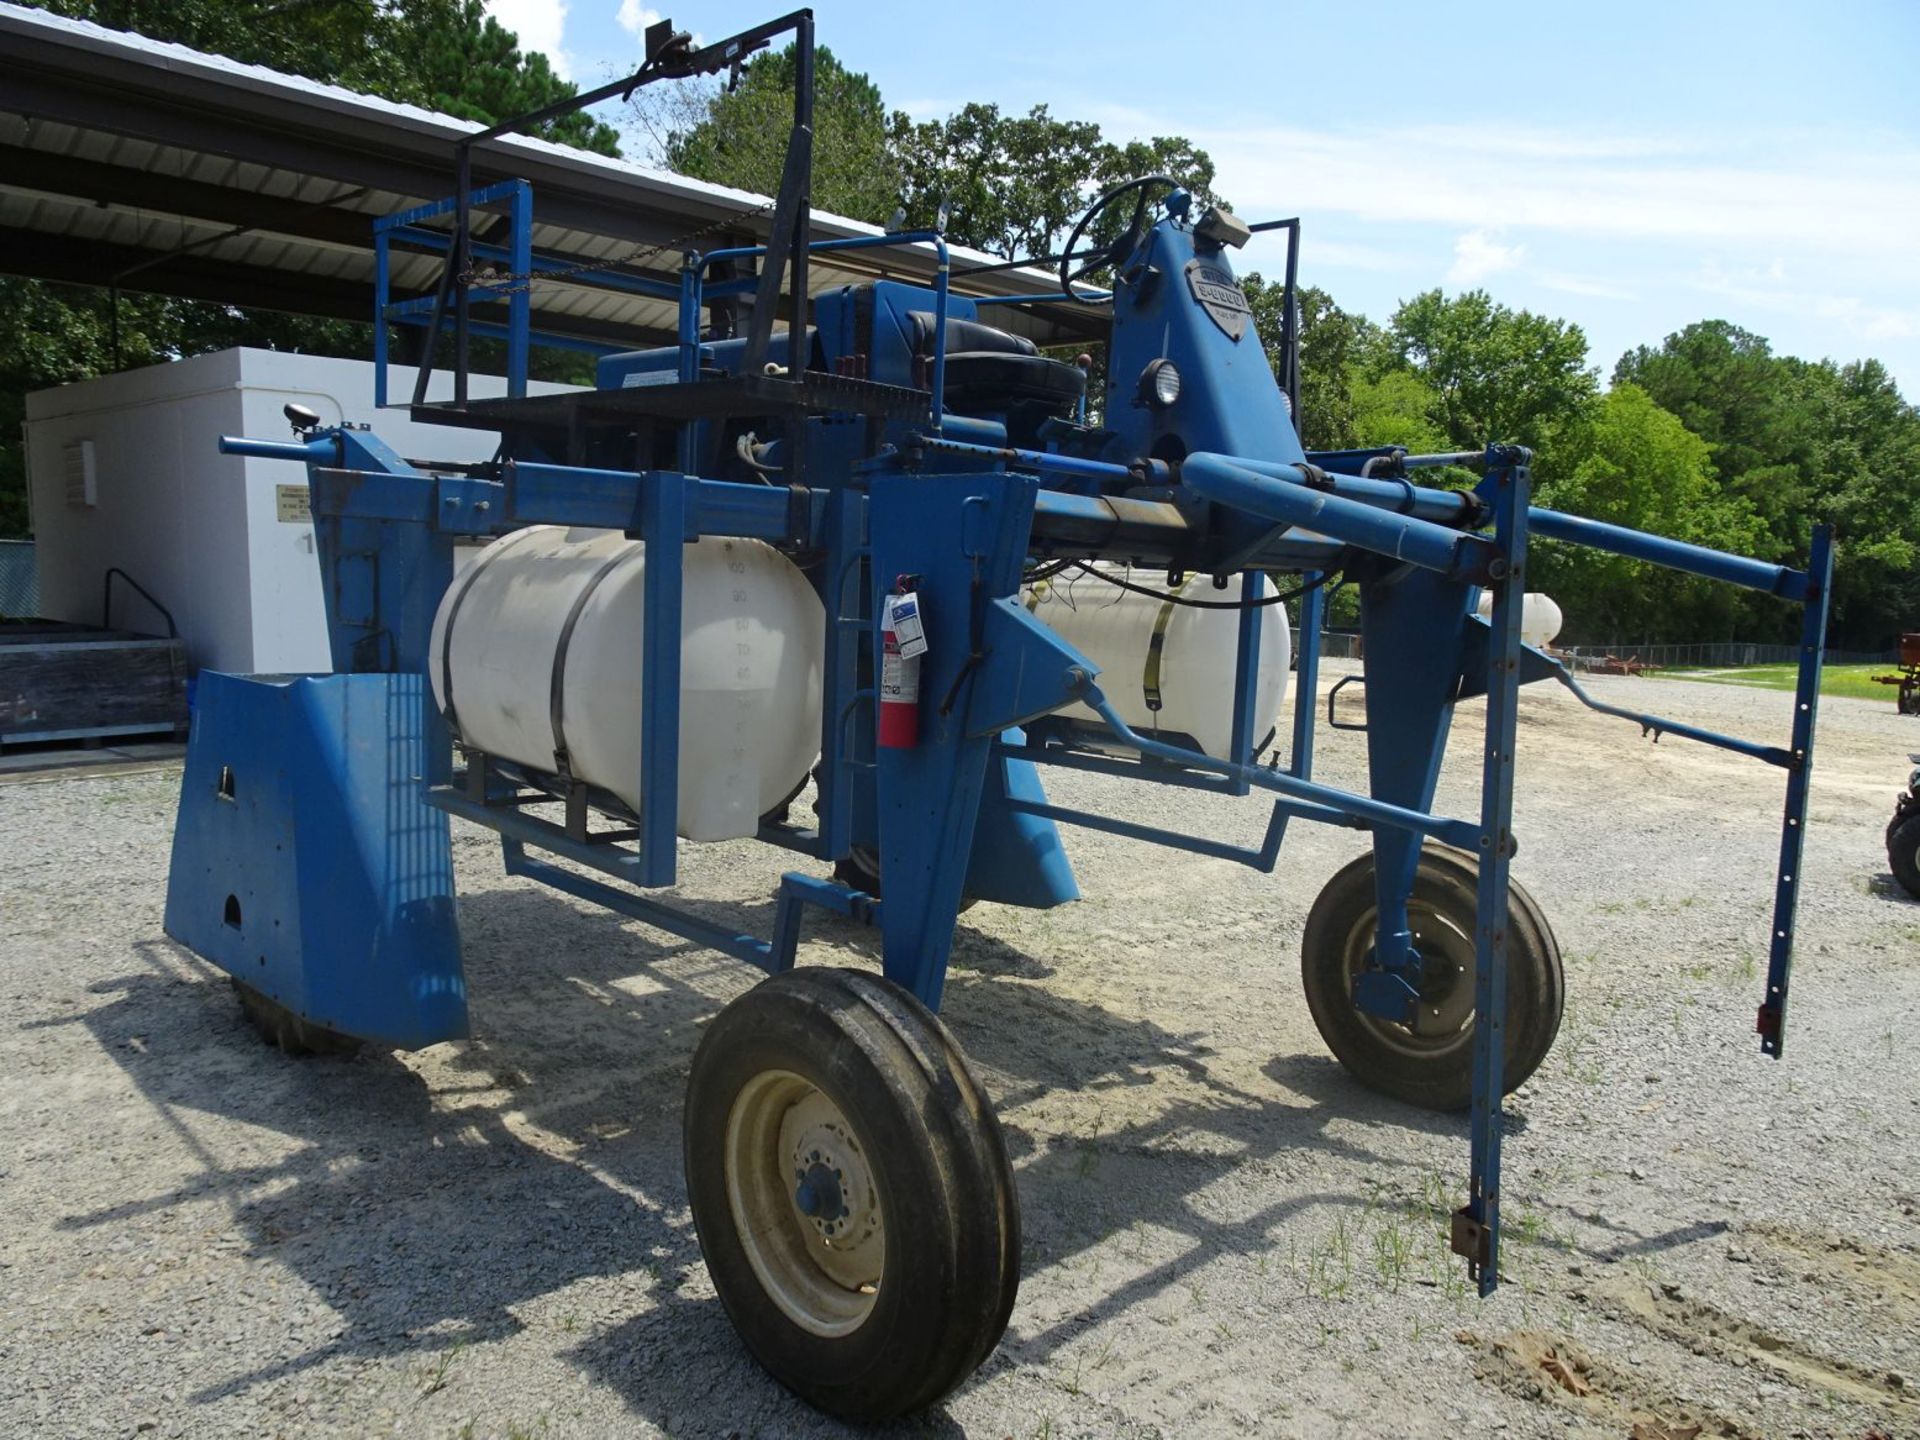 Super Blue Boy S-6000 High Clearance Crop Sprayer With Front Mounted Booms and (2) 100 Gallon Tanks - Image 2 of 7